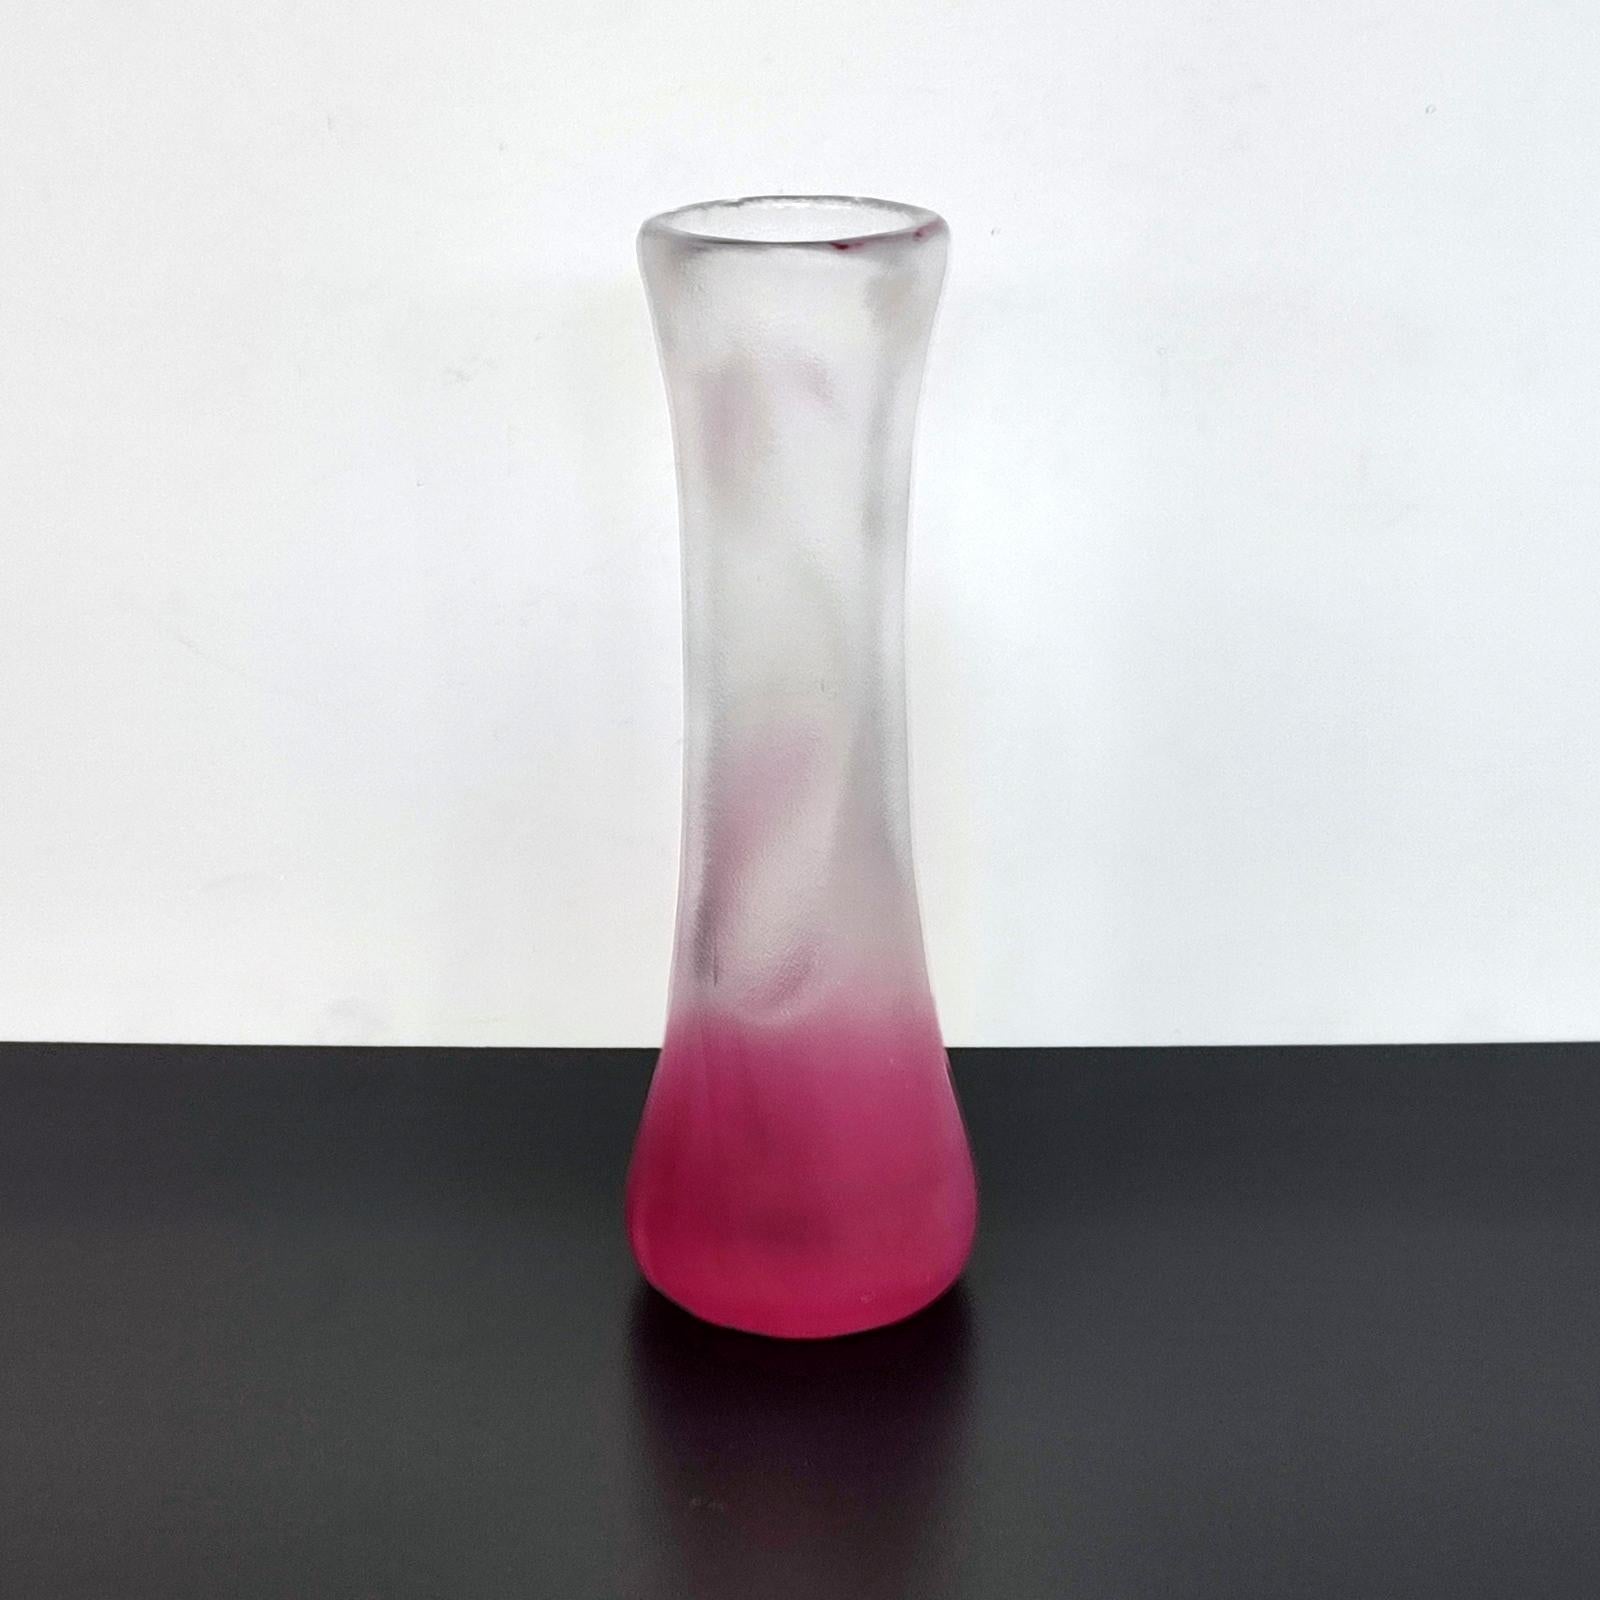 Paul Hoff Pink Flamingo Glass vase - FREE SHIPPING In Excellent Condition For Sale In Bochum, NRW